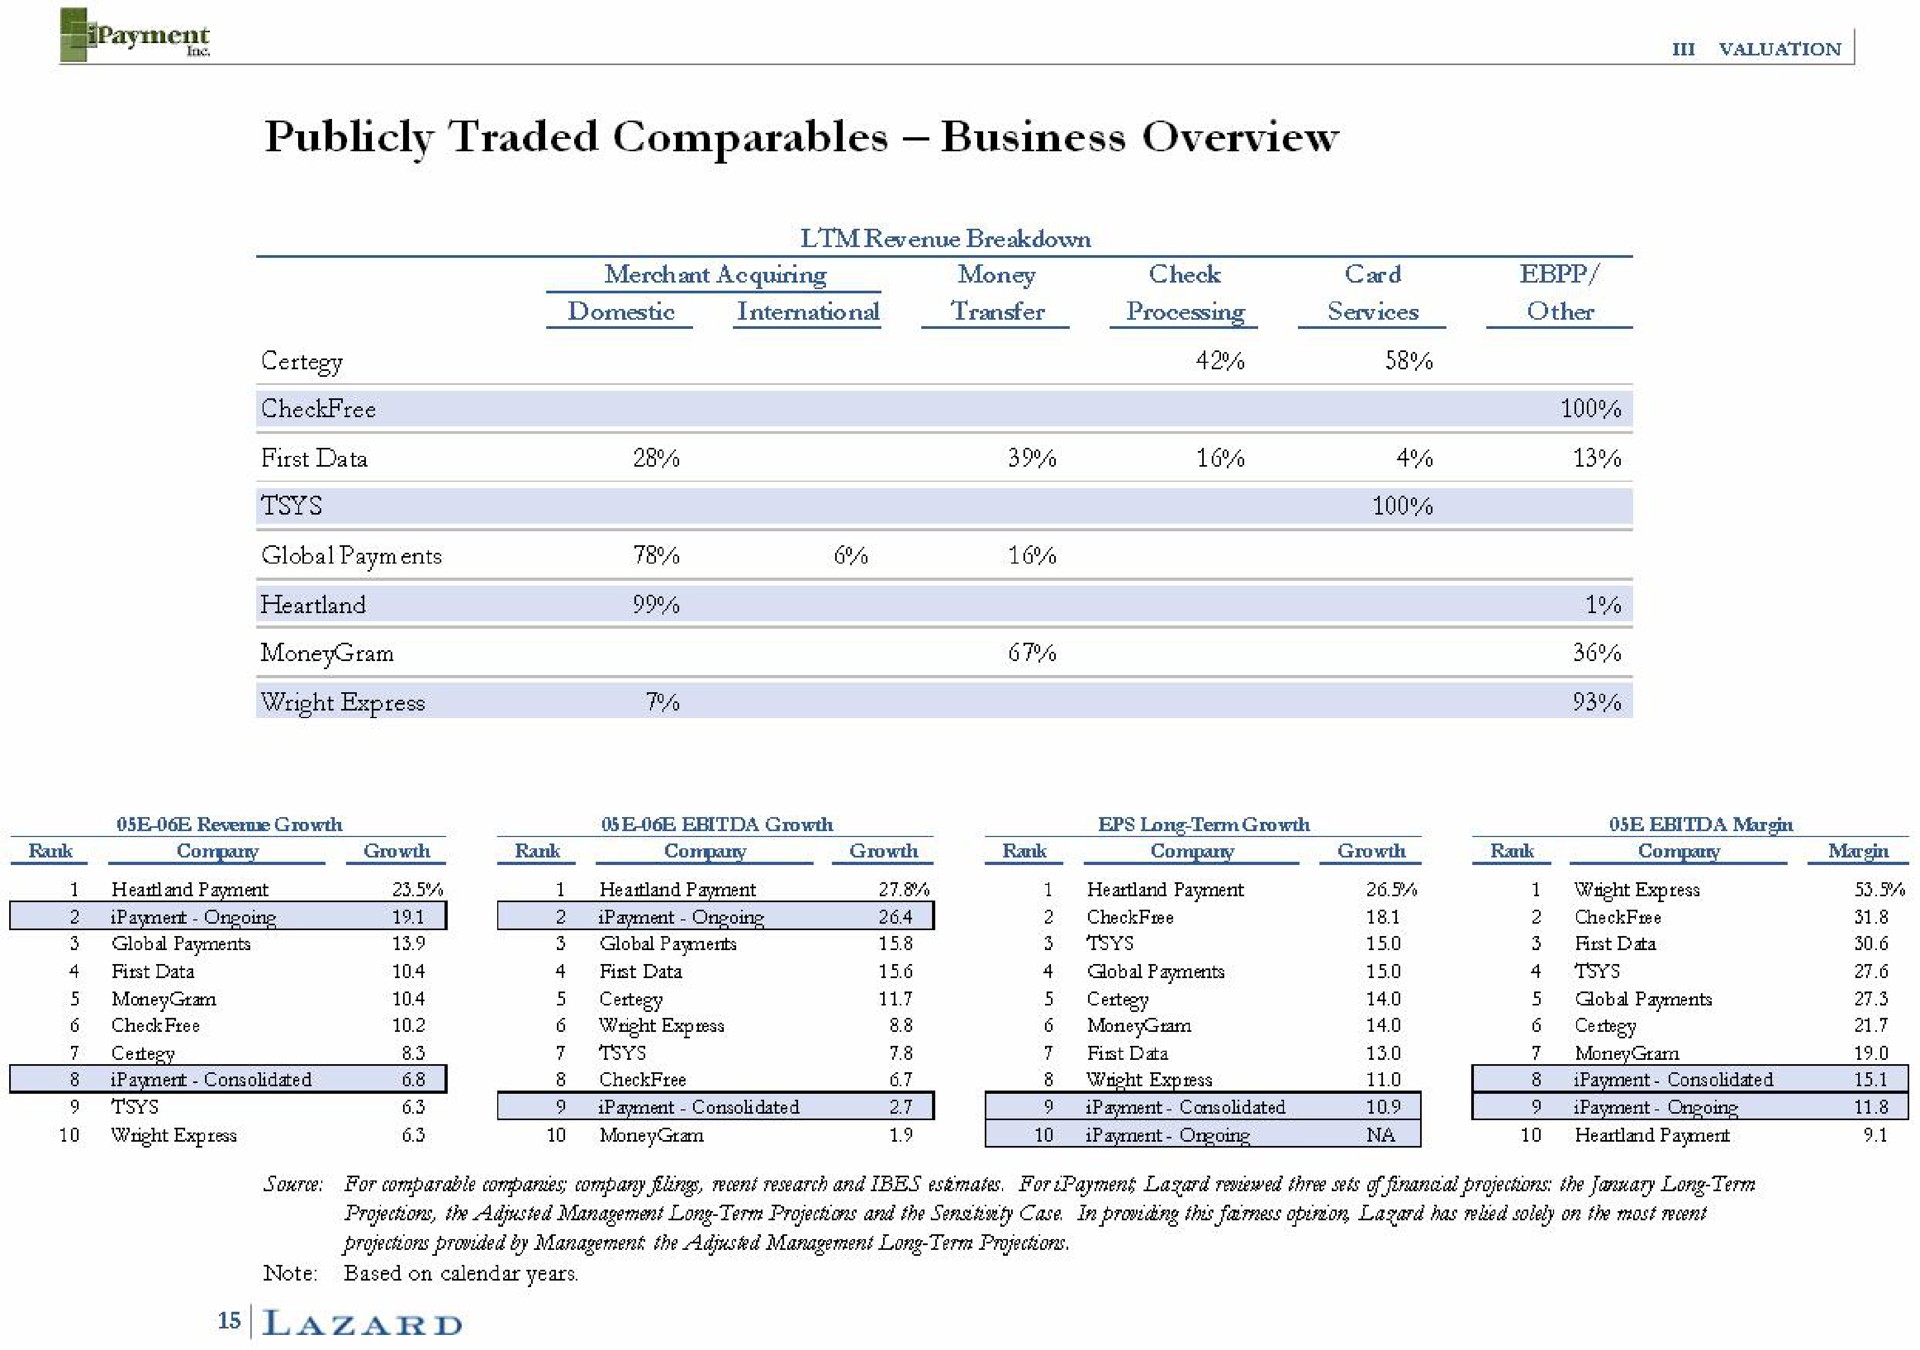 publicly traded business overview | Lazard